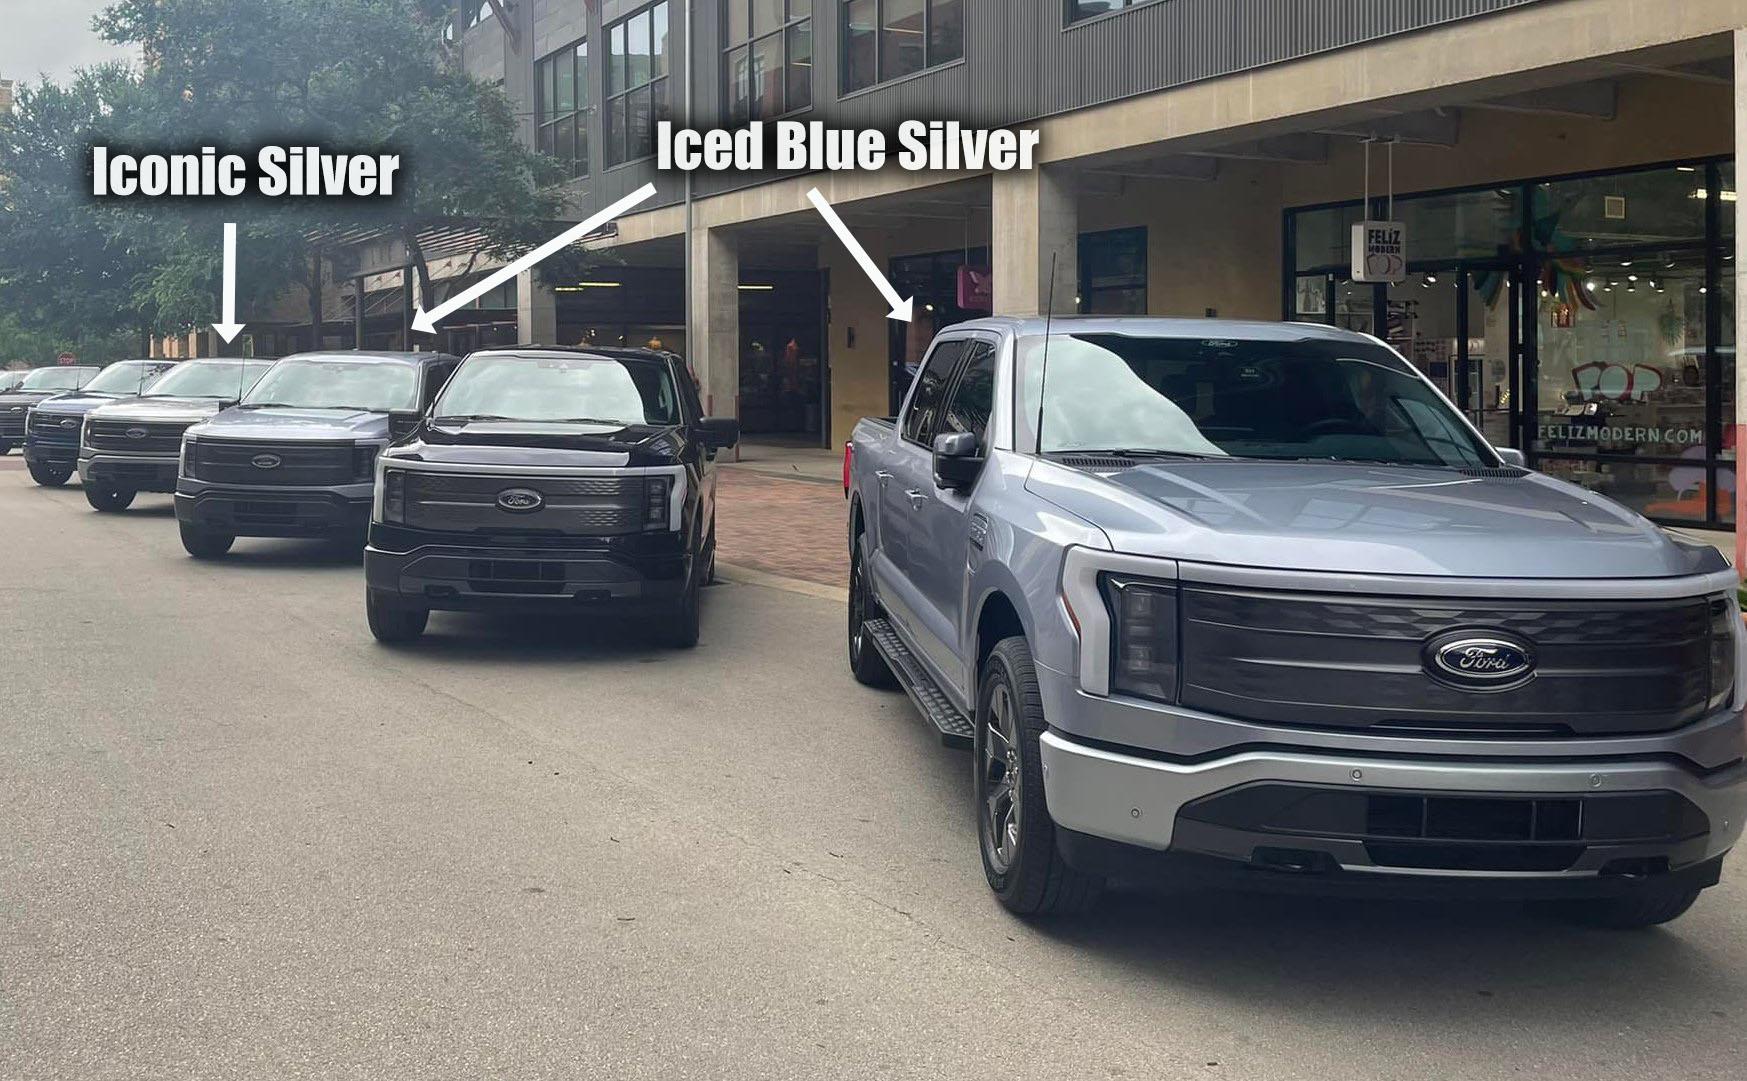 Ford F-150 Lightning Iced Blue Silver vs Iconic Silver F-150 Lightning Side-by-Side Comparison Photos F150 Lightning Iconic Silver vs Iced Blue Silver comparison vs side by side